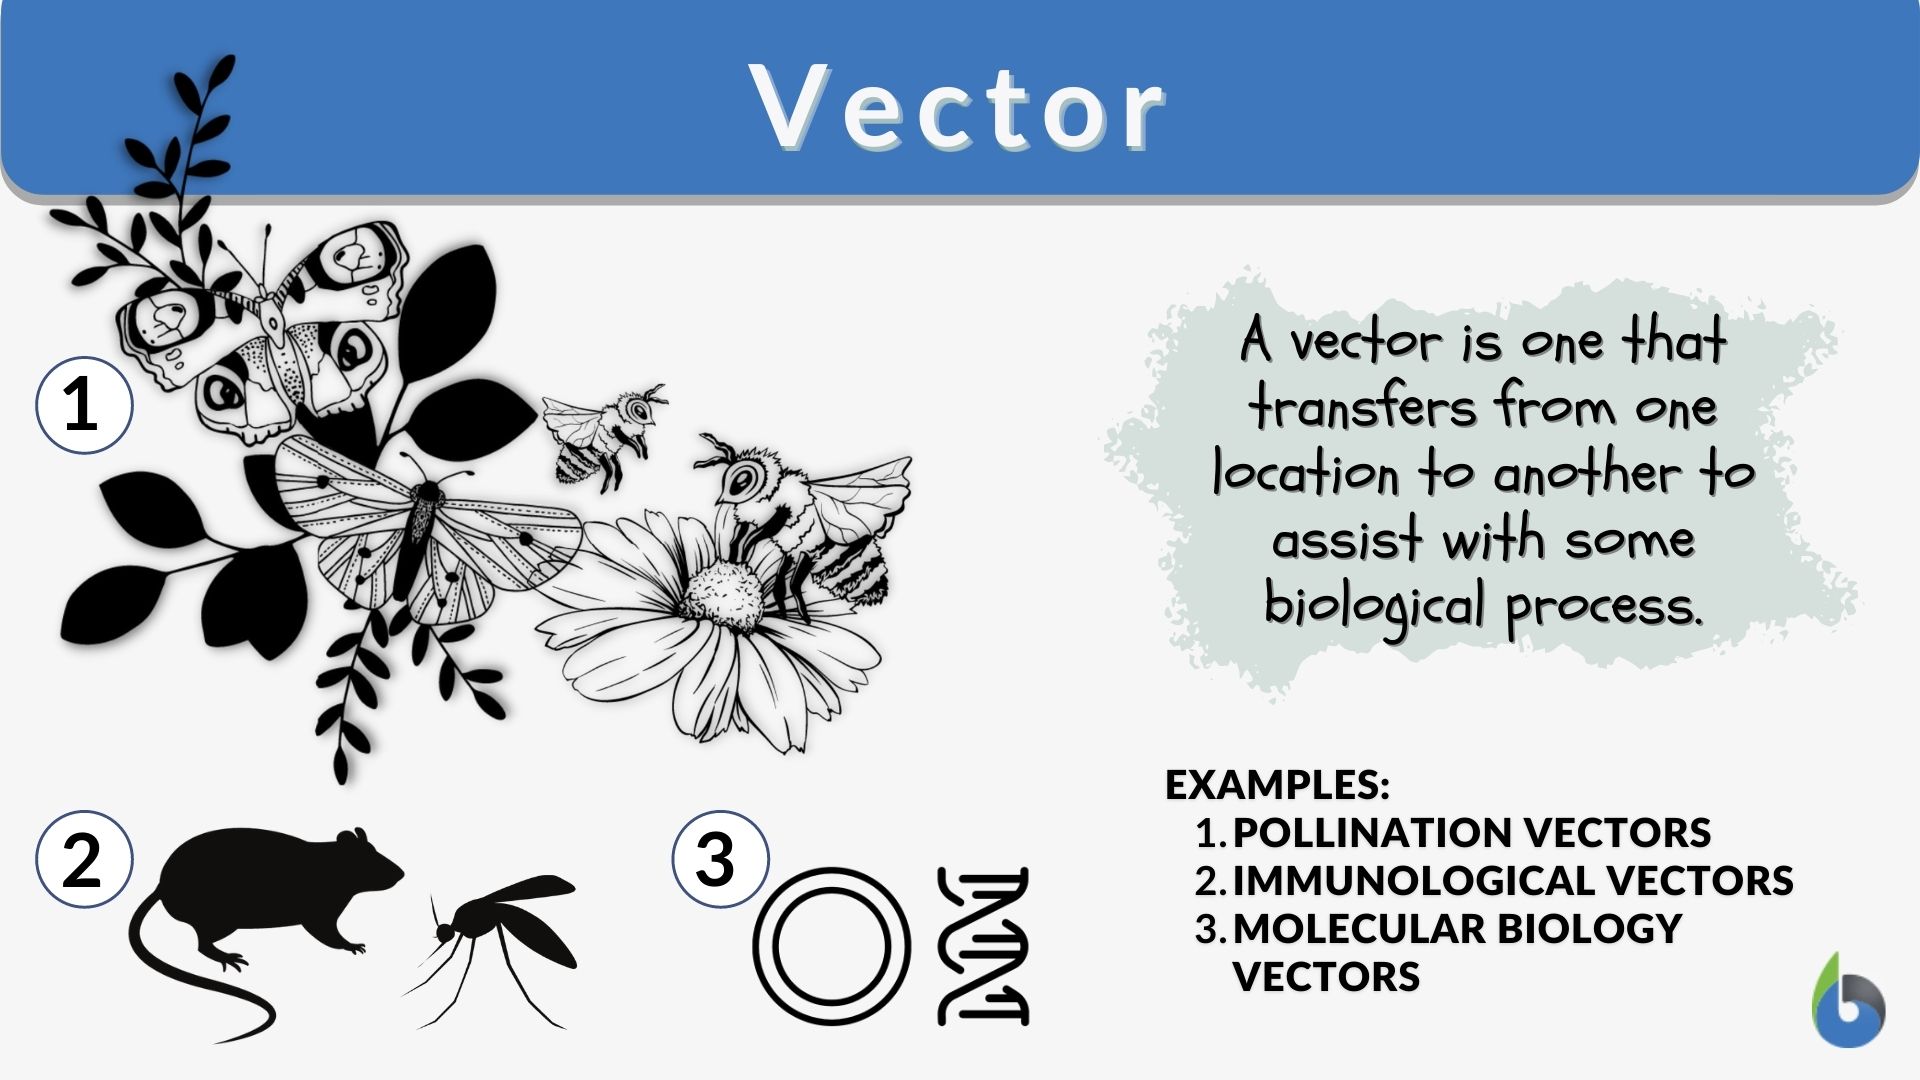 Vector Definition and Examples - Biology Online Dictionary